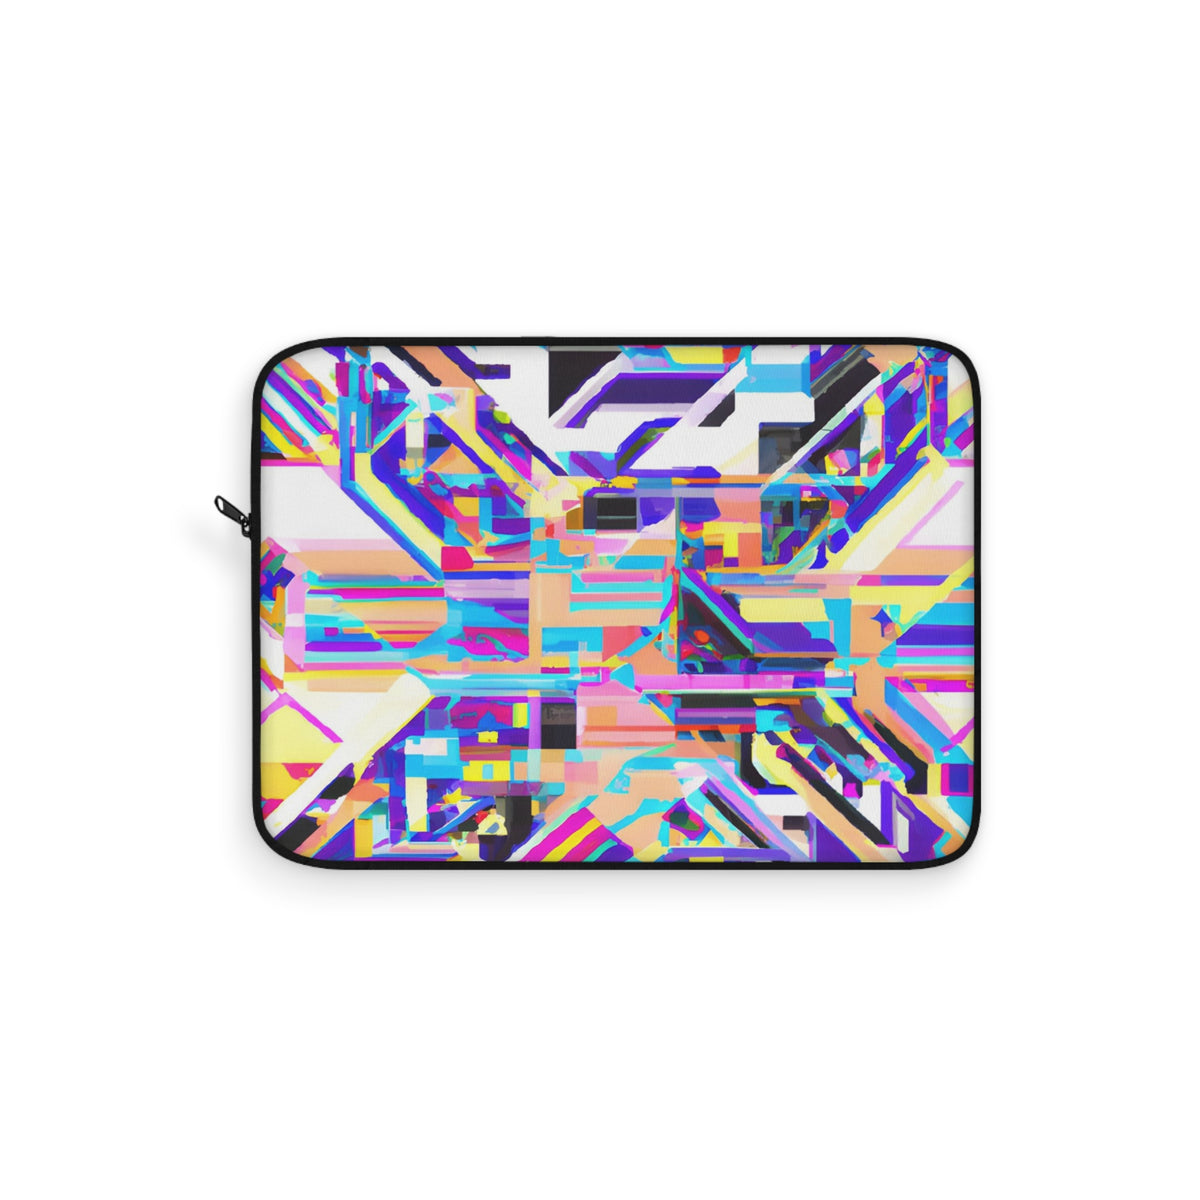 MicroLucina - Gay-Inspired Laptop Sleeve (12", 13", 15")